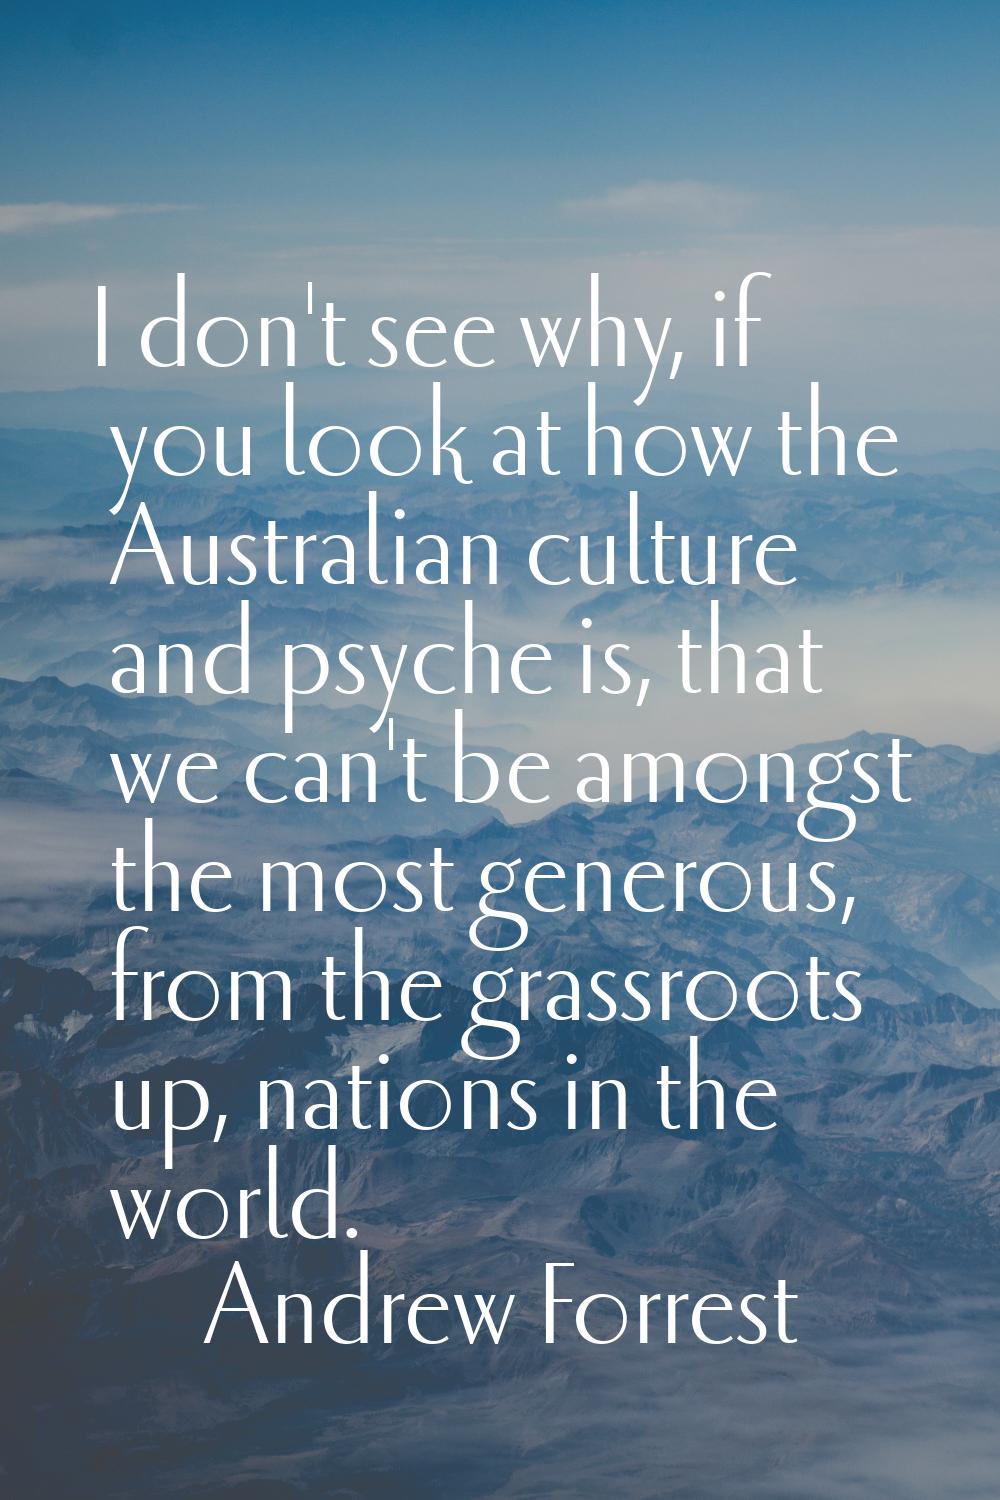 I don't see why, if you look at how the Australian culture and psyche is, that we can't be amongst 